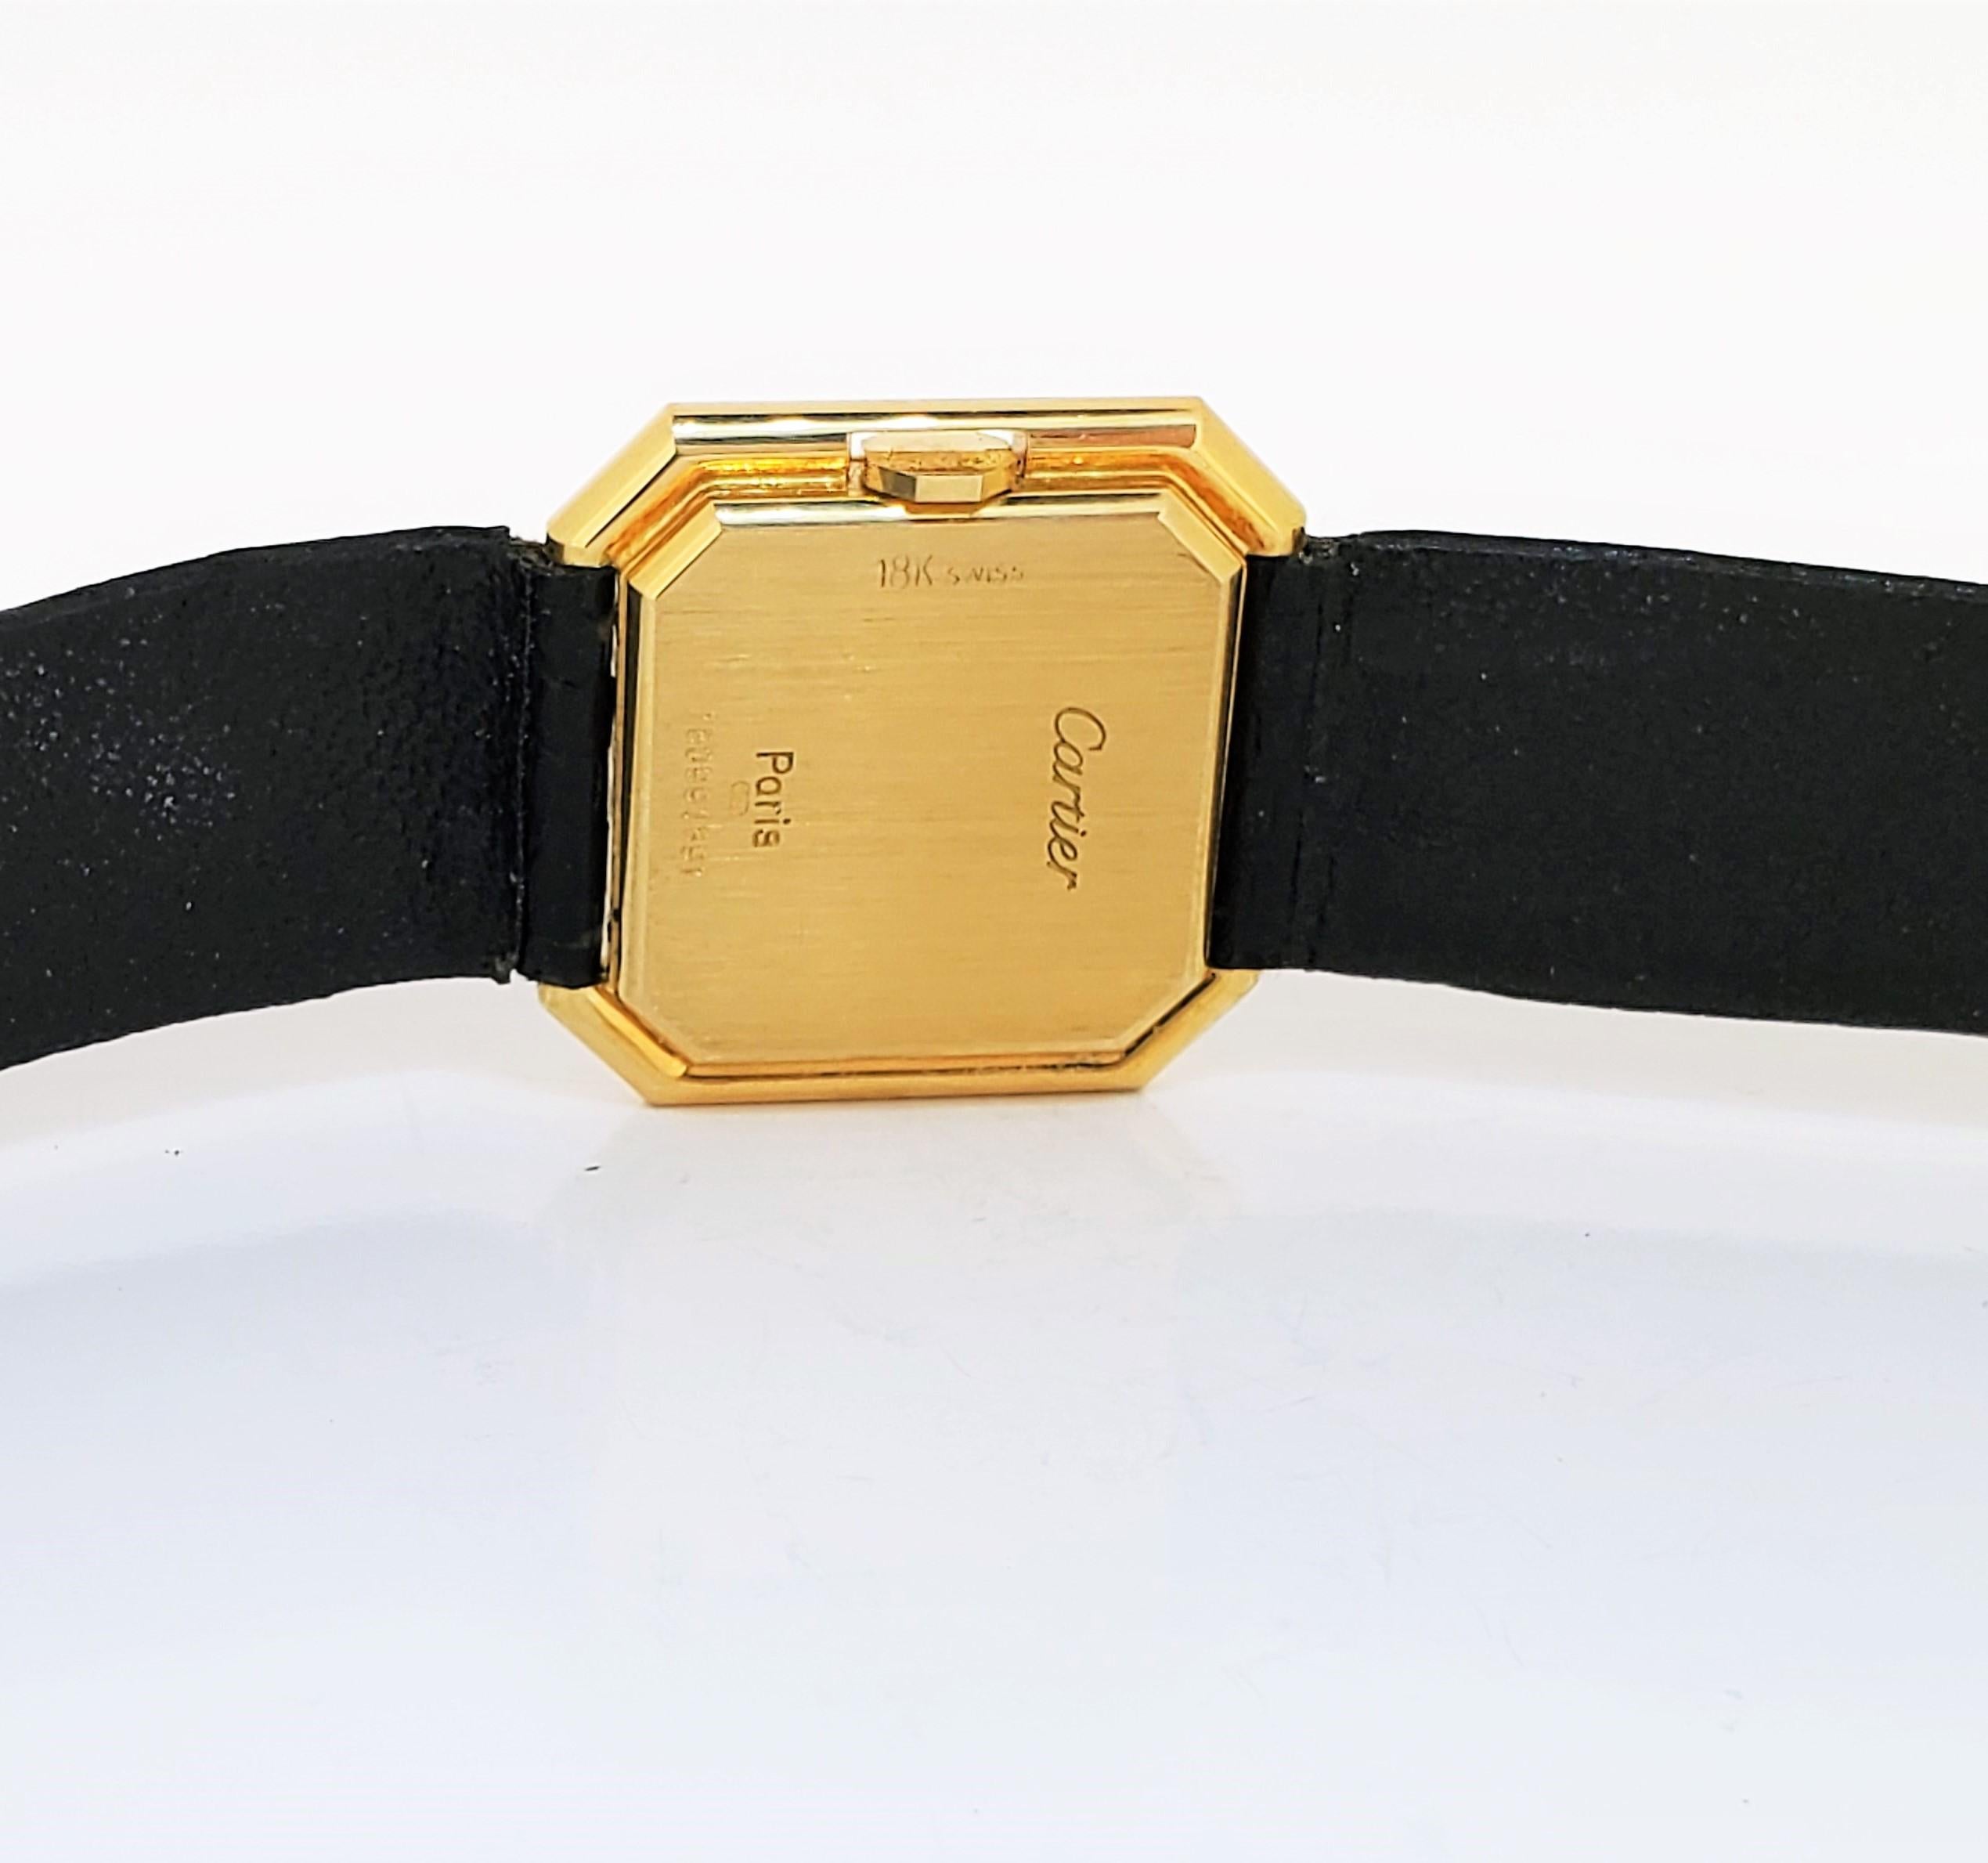 Vintage Cartier Paris Centure PM,  Small Octagon shaped Watch, circa 1975-1980 In Good Condition For Sale In Santa Monica, CA